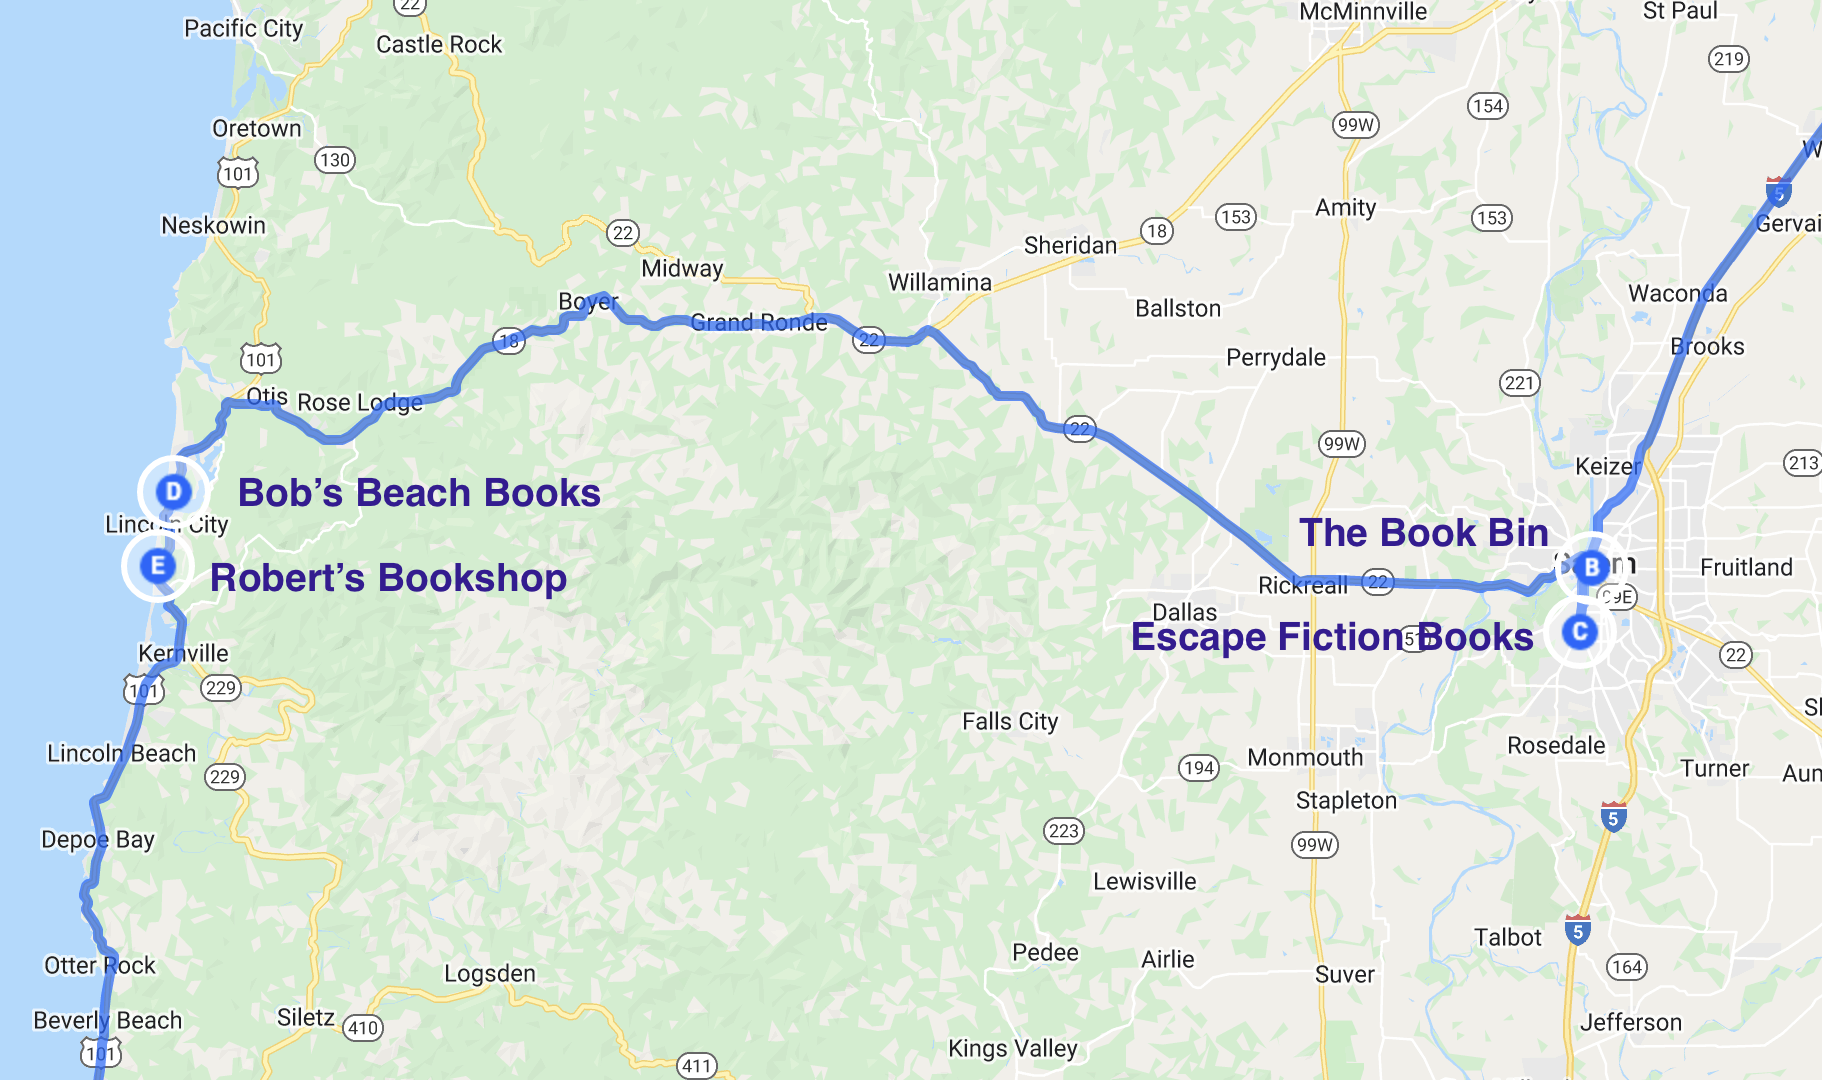 map of literary spots in salem and lincoln city oregon